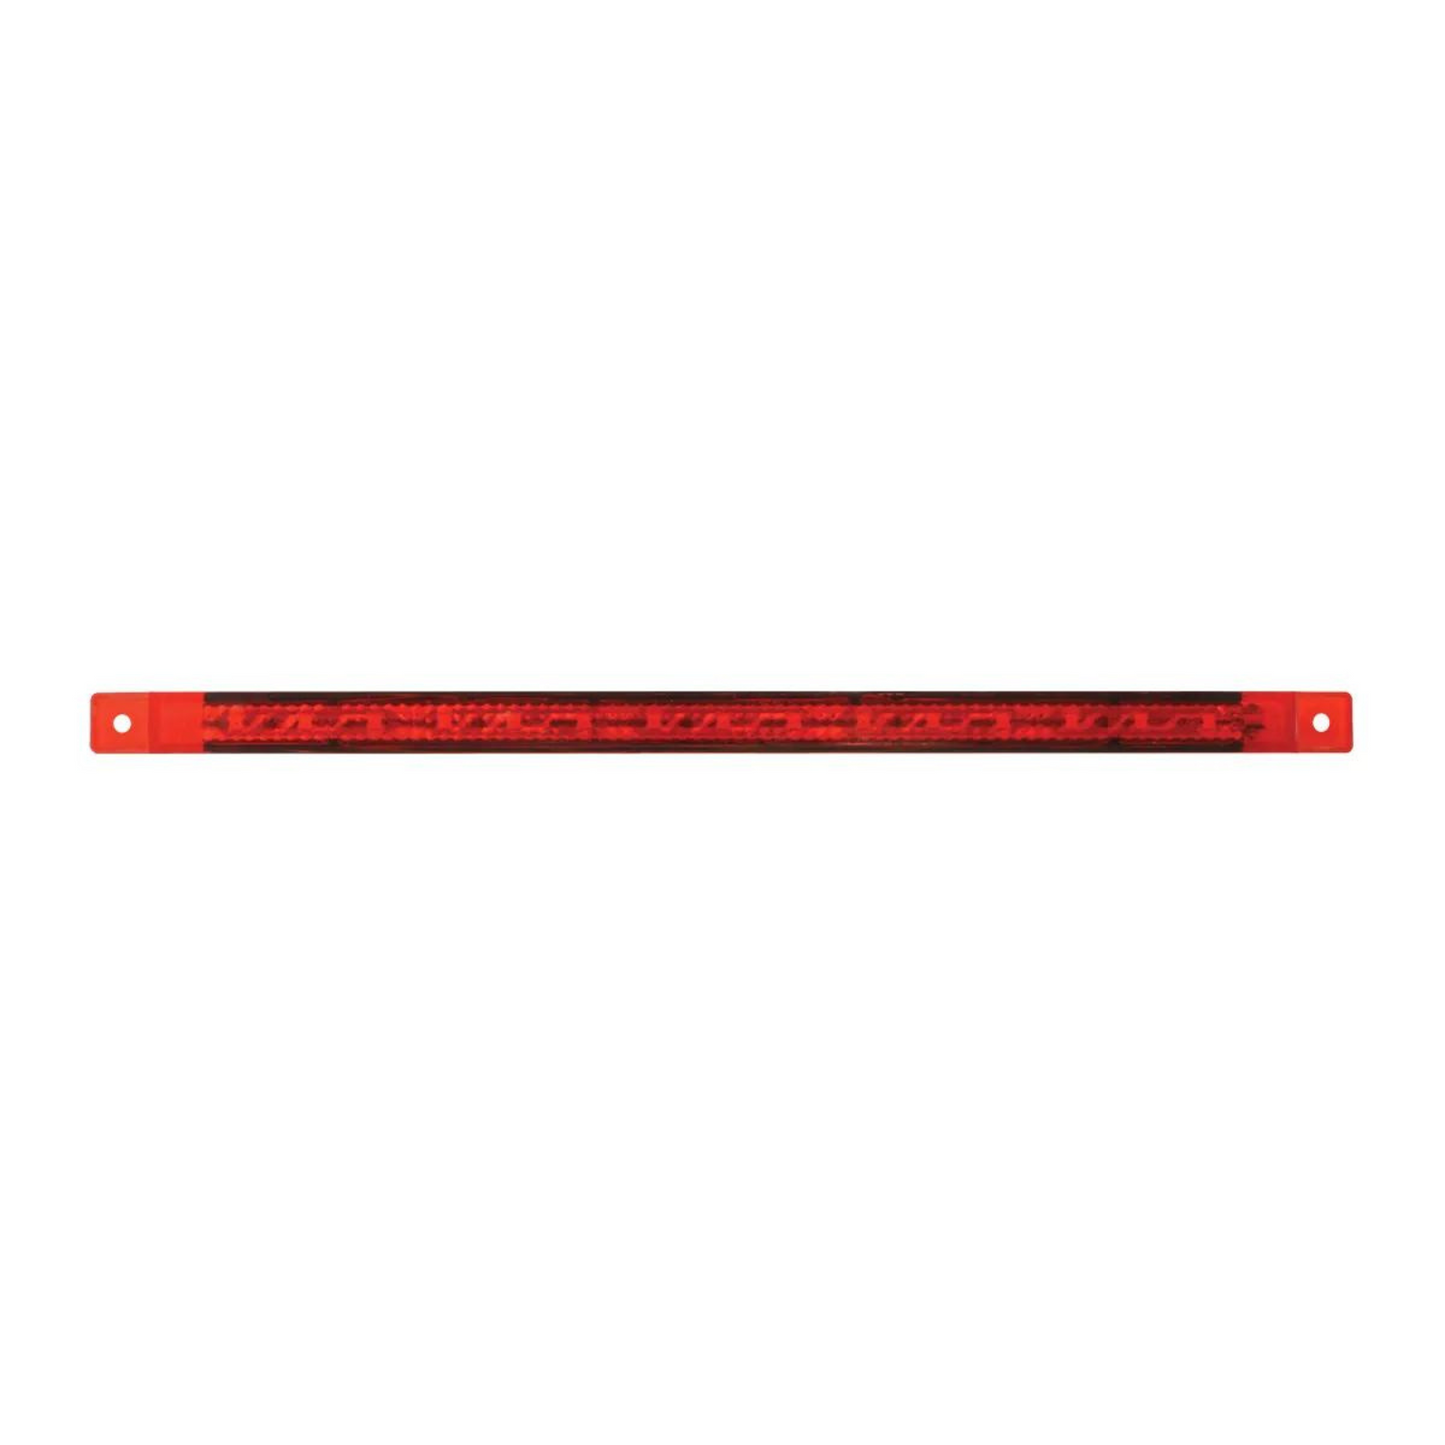 Ultra Thin 15 LED Light Bar in Red